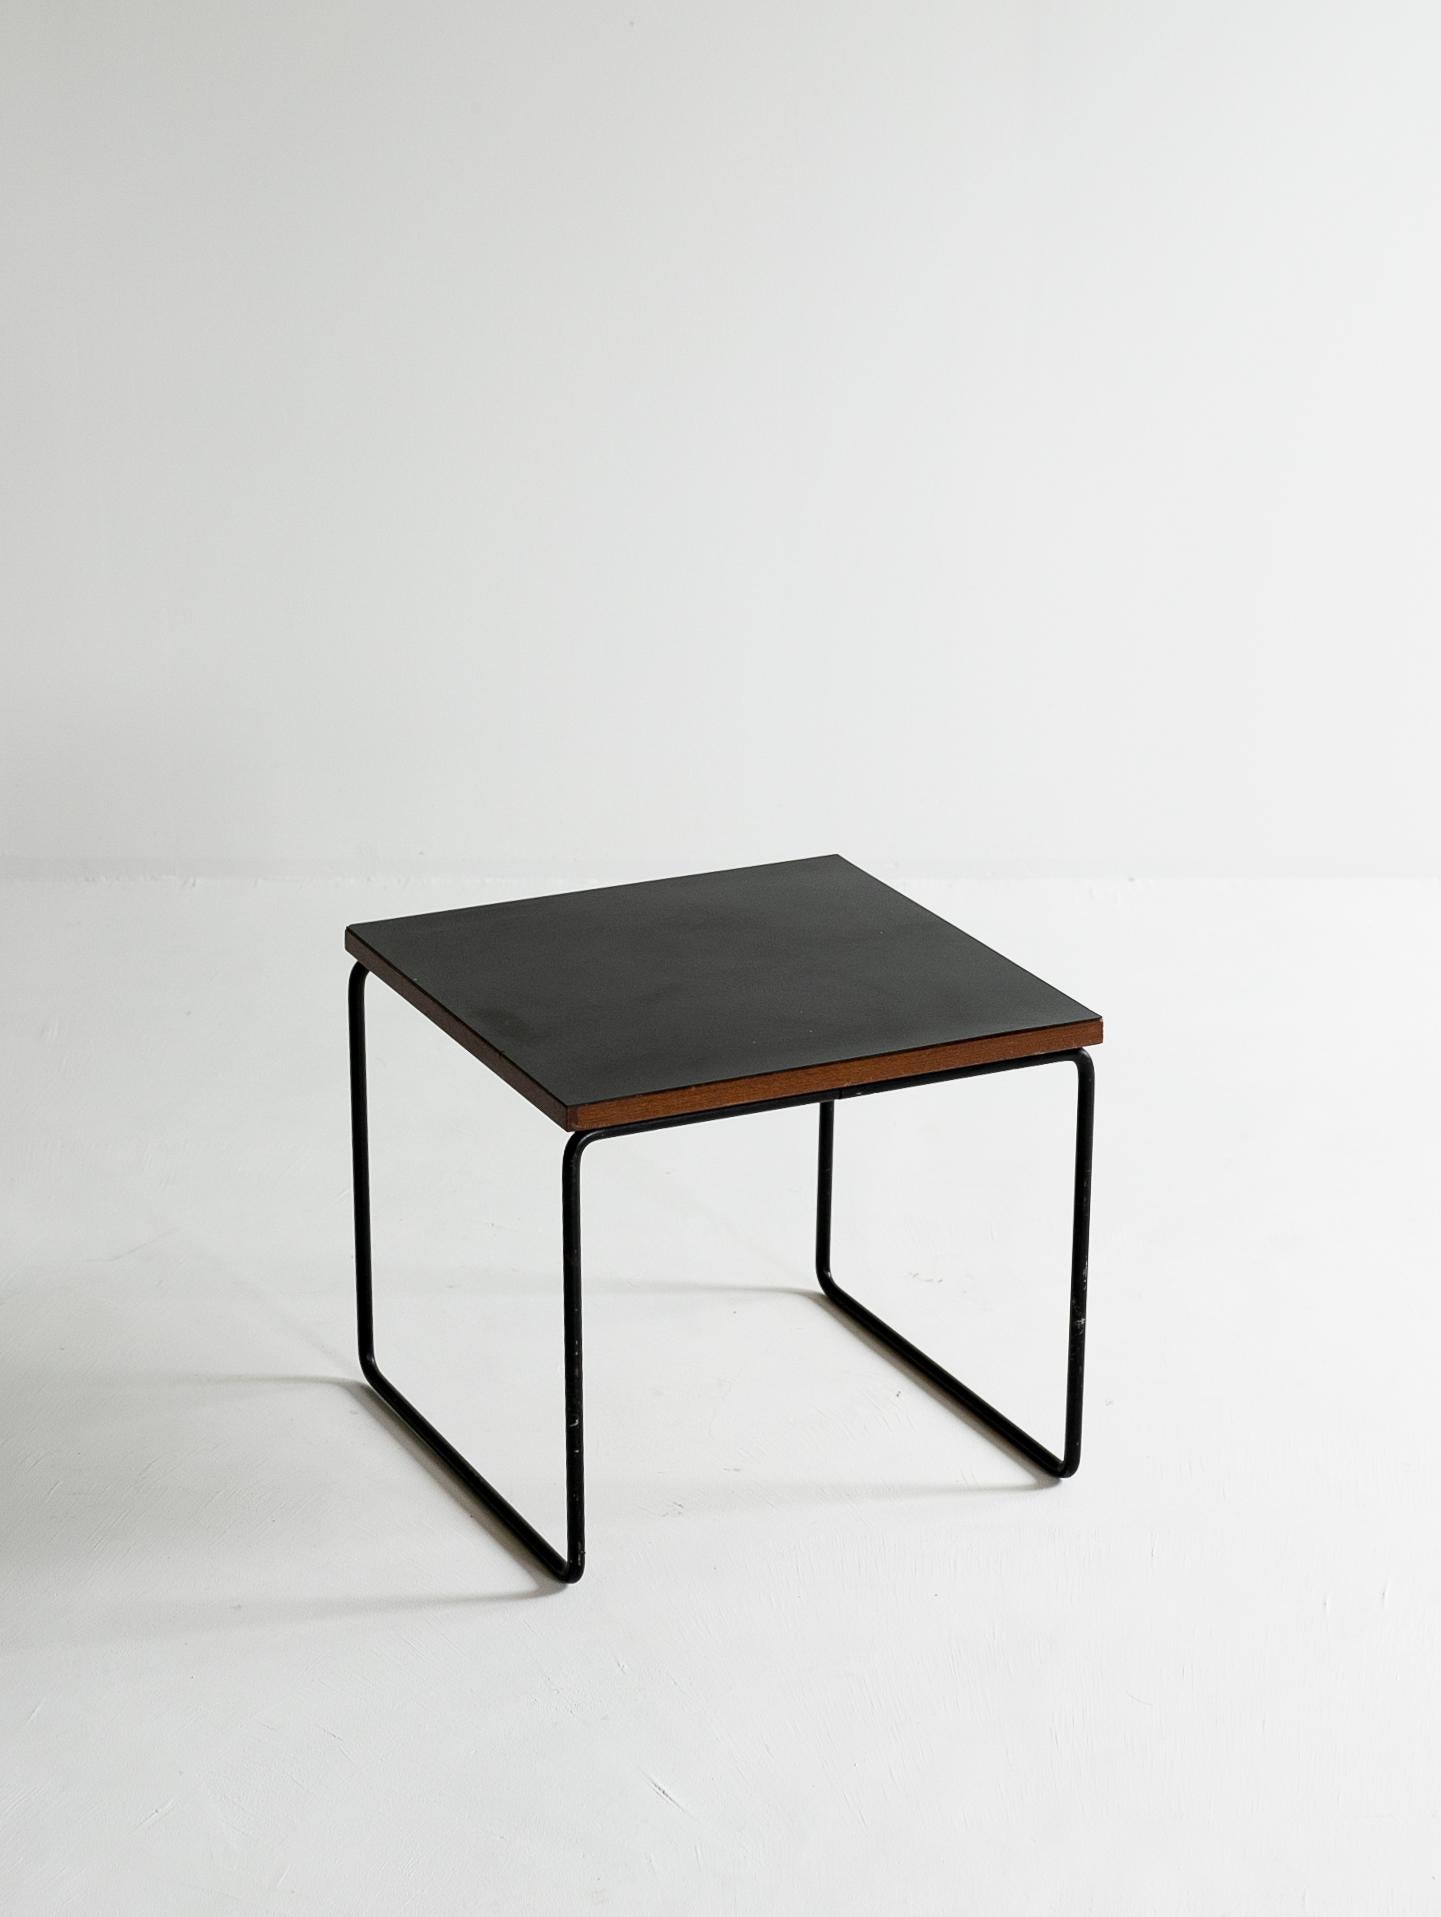 Pierre Guariche «VOLANTE» table for Steiner, 1950s.

Side table designed by Pierre Guariche.
Simple design with a melanin-coated wooden top and black painted steel legs.
The labels from the period also remain.